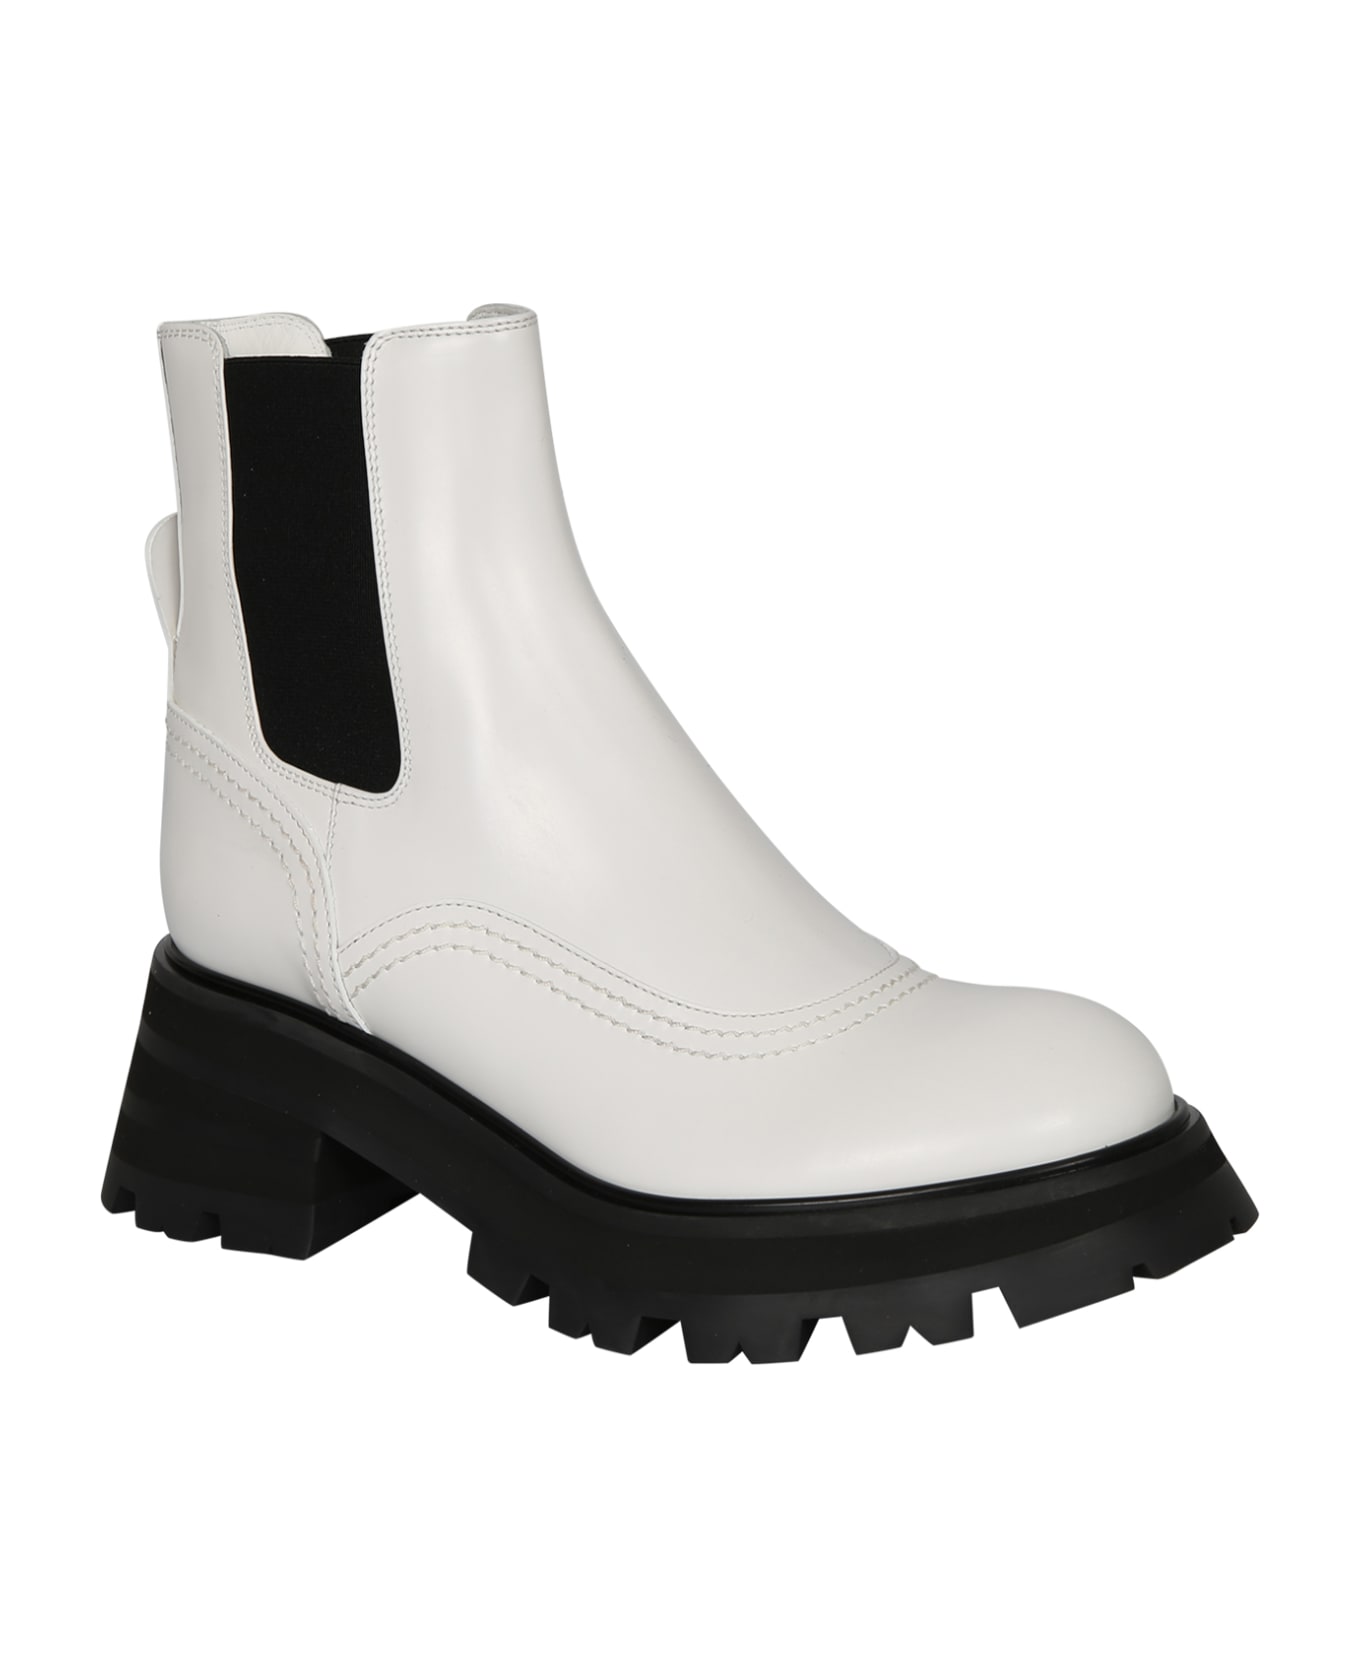 Alexander McQueen Ankle Boots - White ブーツ